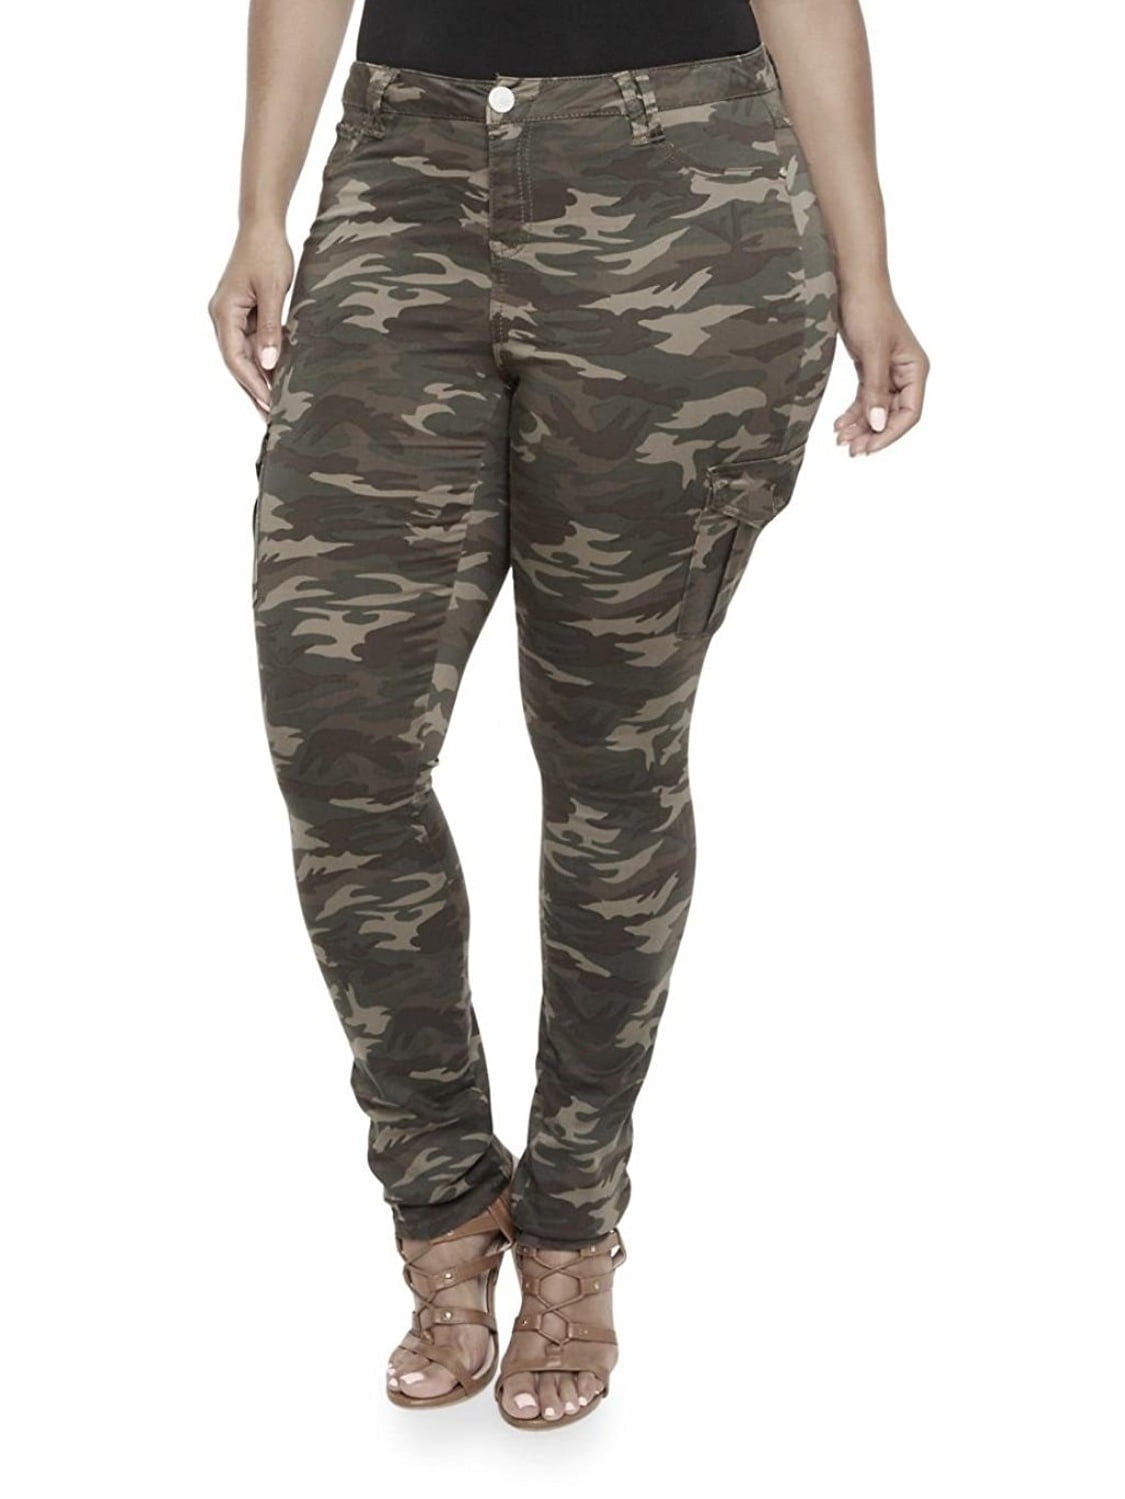 camouflage jeggings plus size